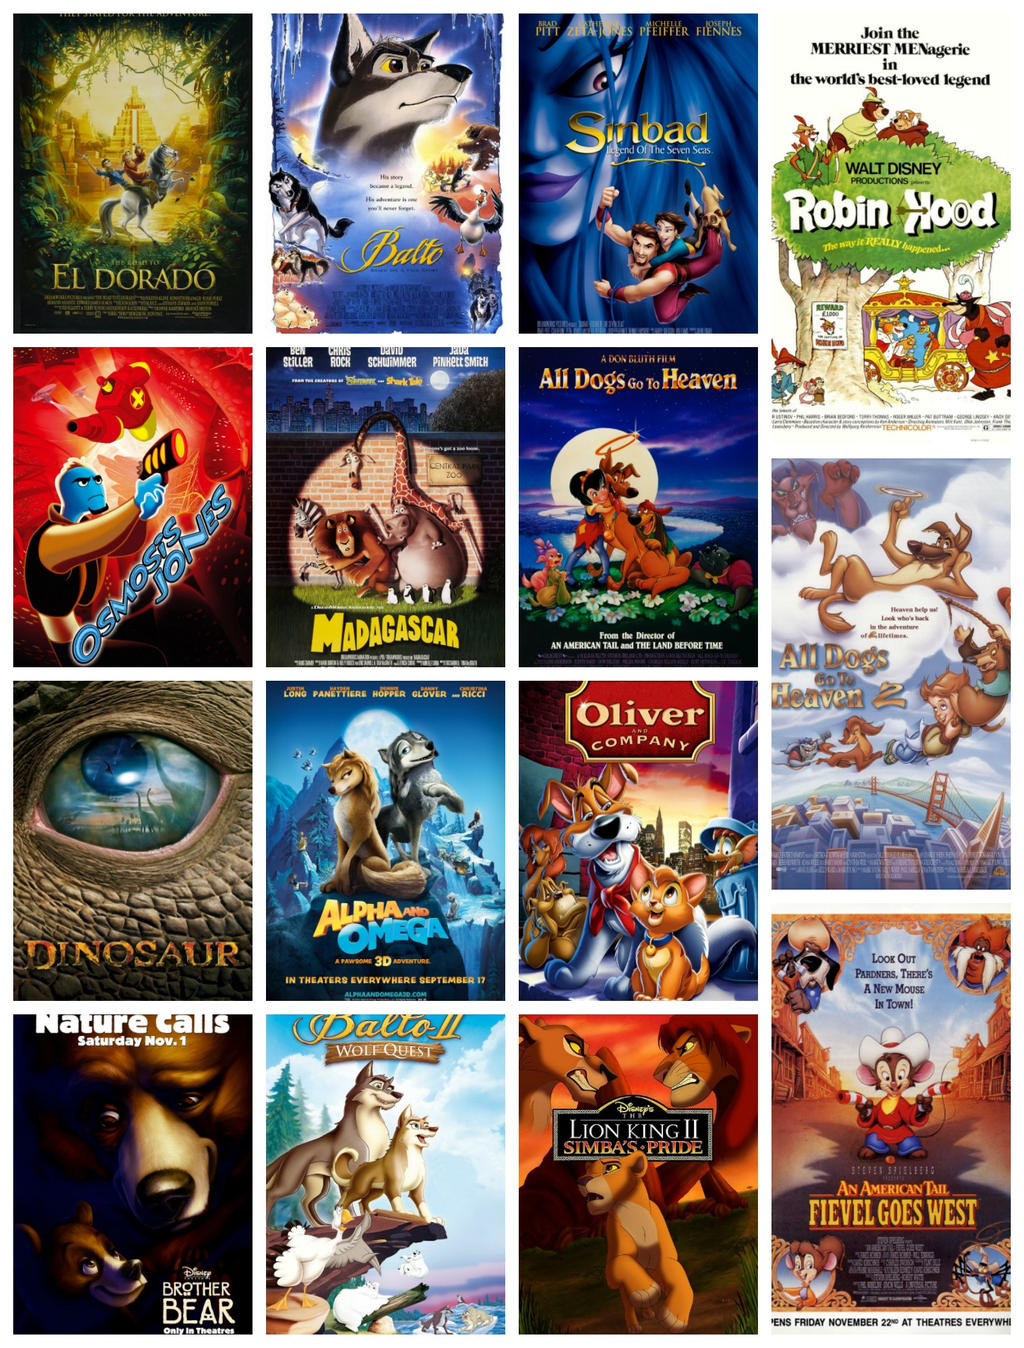 My Top 15 Animated Movies with Mediocre Reviews by foxylvr2189 on DeviantArt